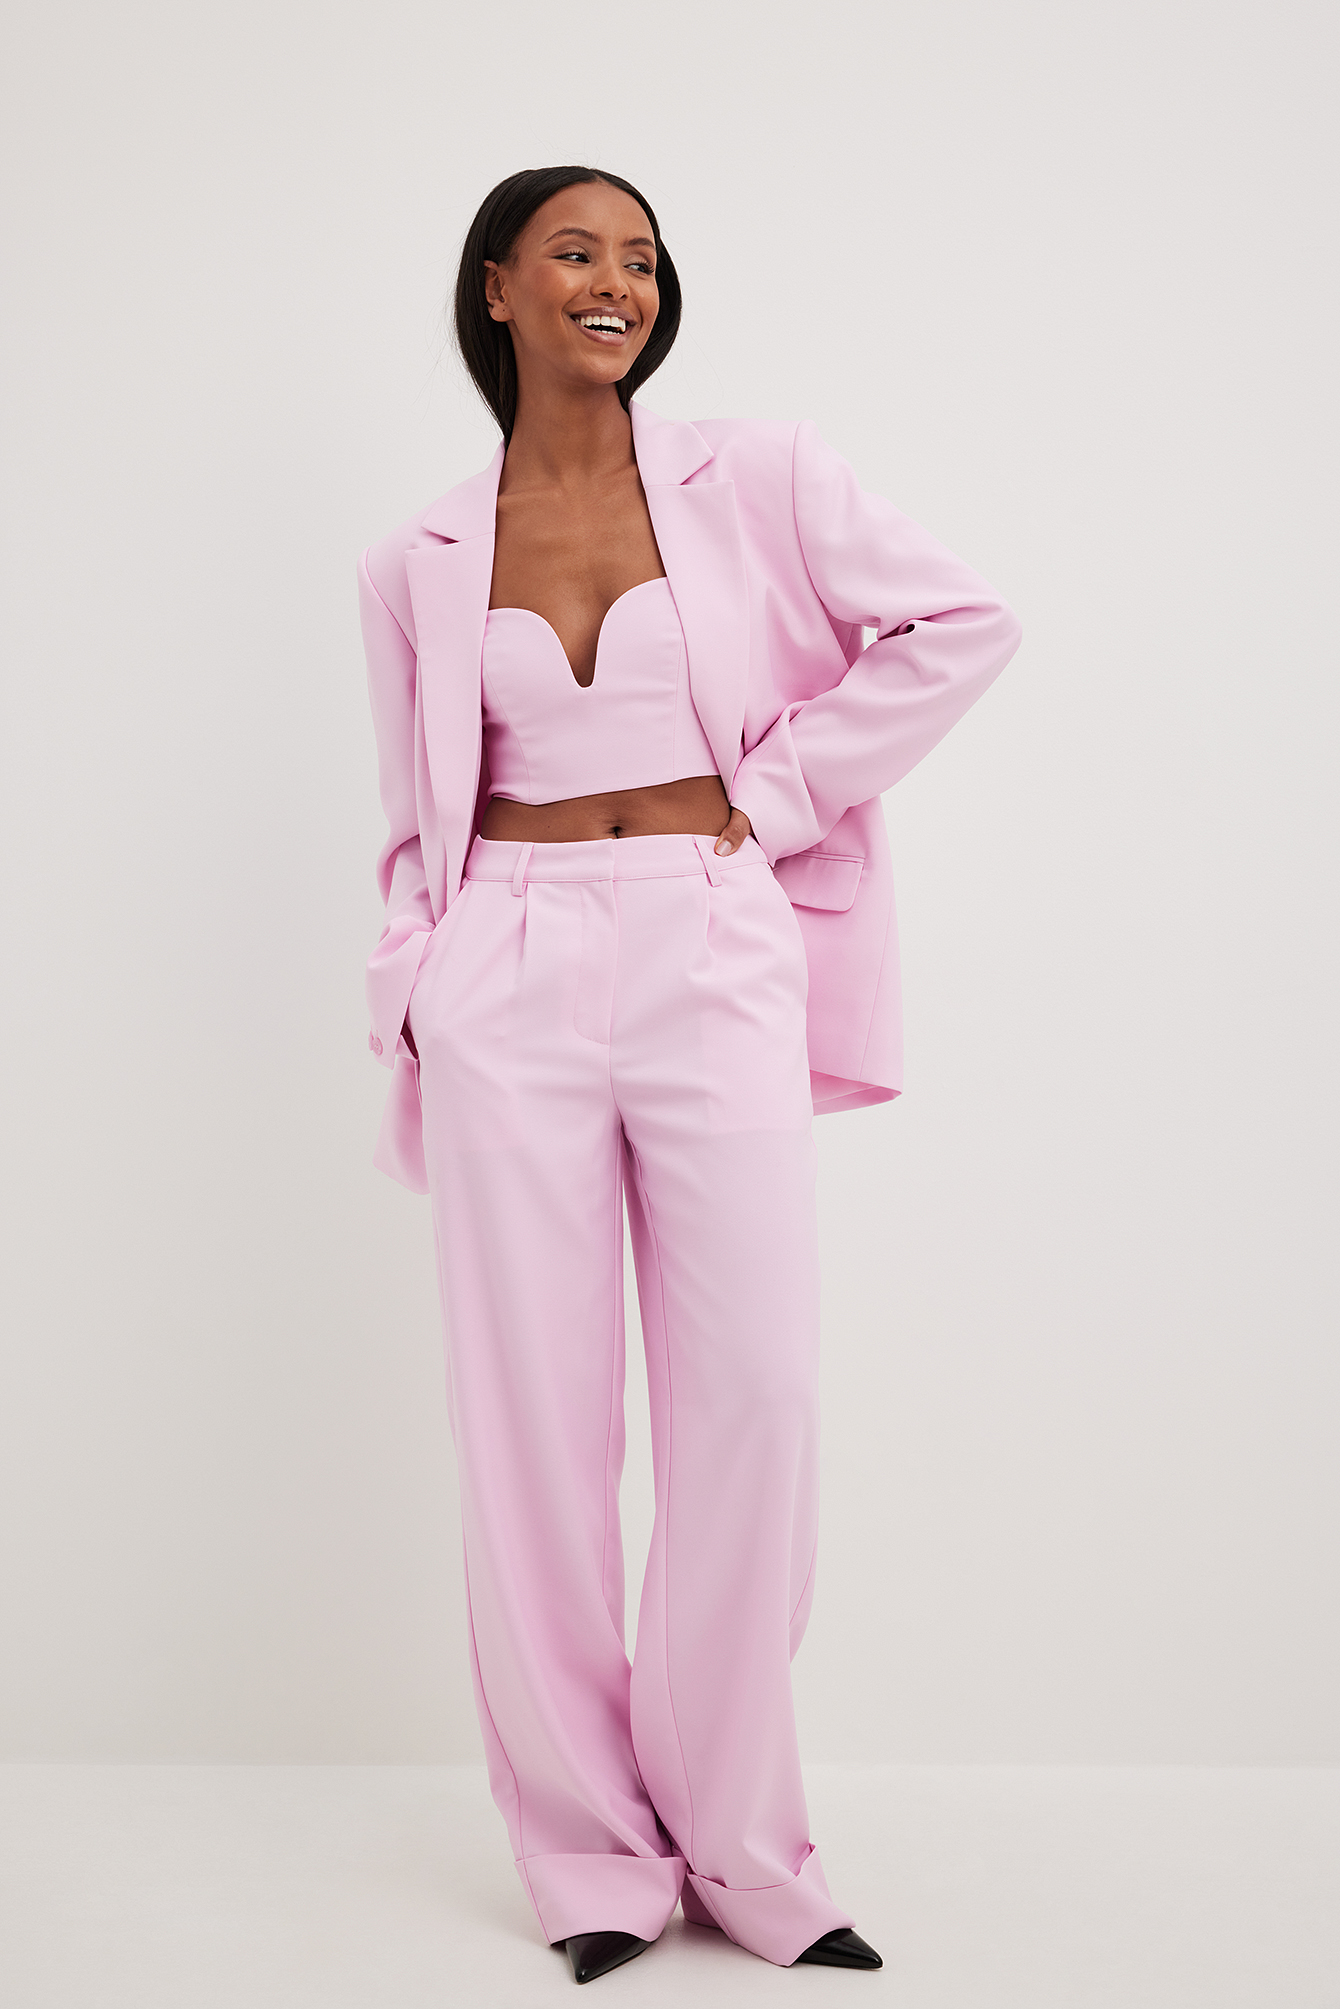 Hot Pink 3-piece Pantsuit for Women, Pink Blazer Trouser Suit for Women  With Bralette Top, Relaxed Fit Blazer and High Waist Pants -  Finland